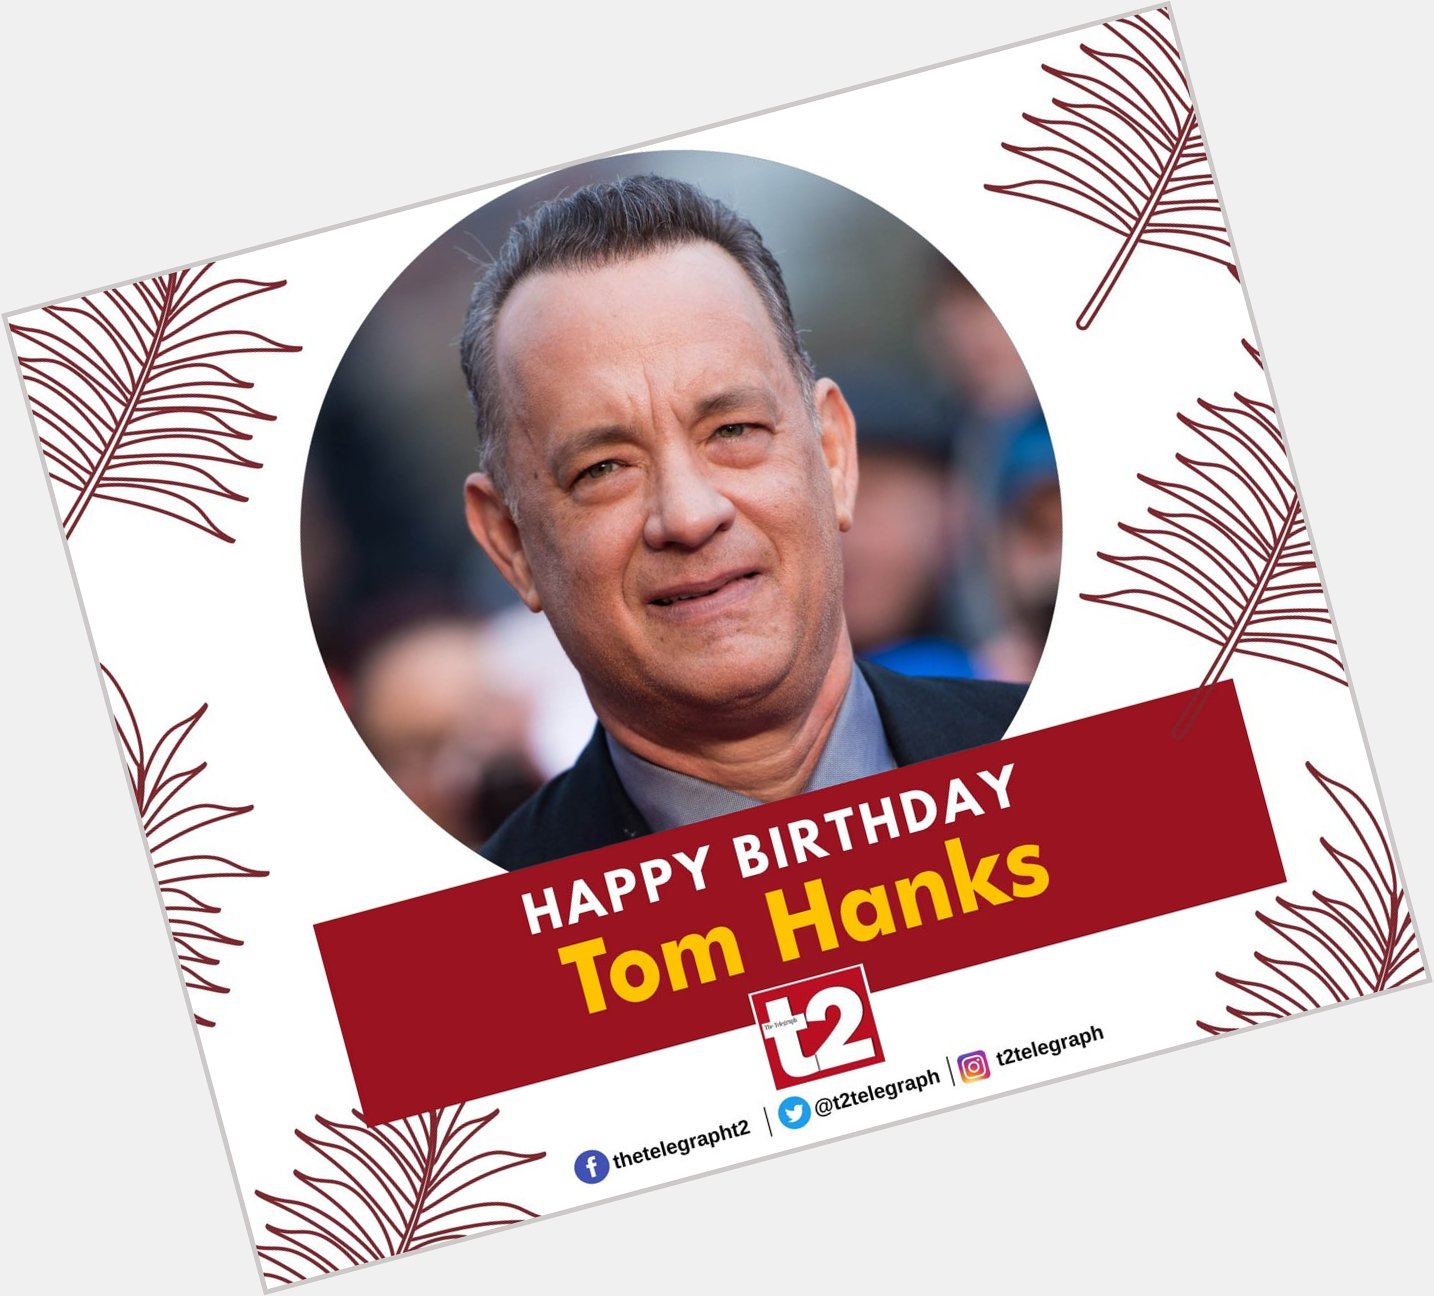 He can make any role come alive in his own special way. Happy birthday Tom Hanks! 